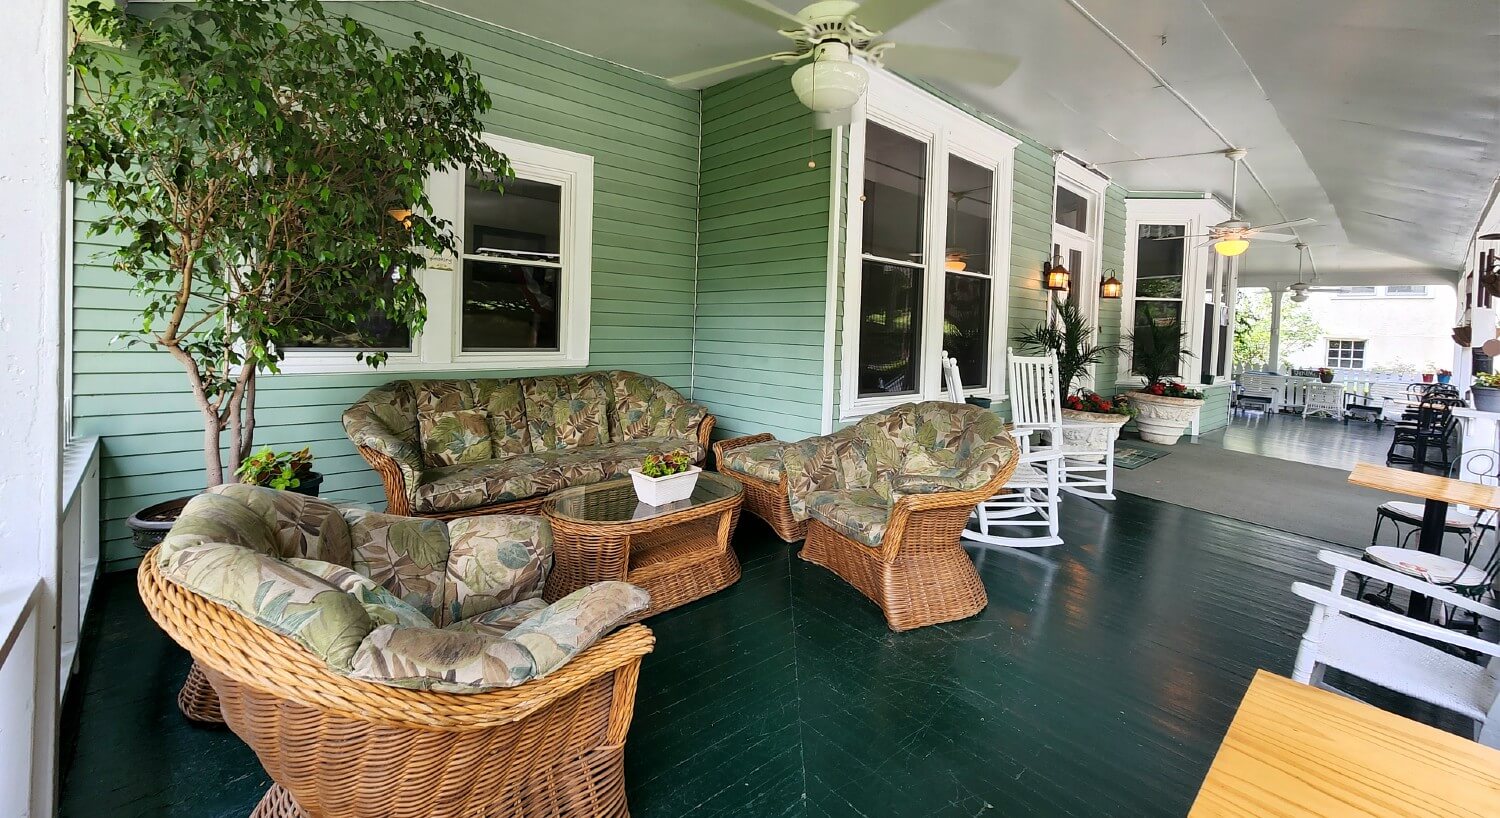 Expansive outdoor wrap around porch with wicker seating, plants and trees and white rocking chairs